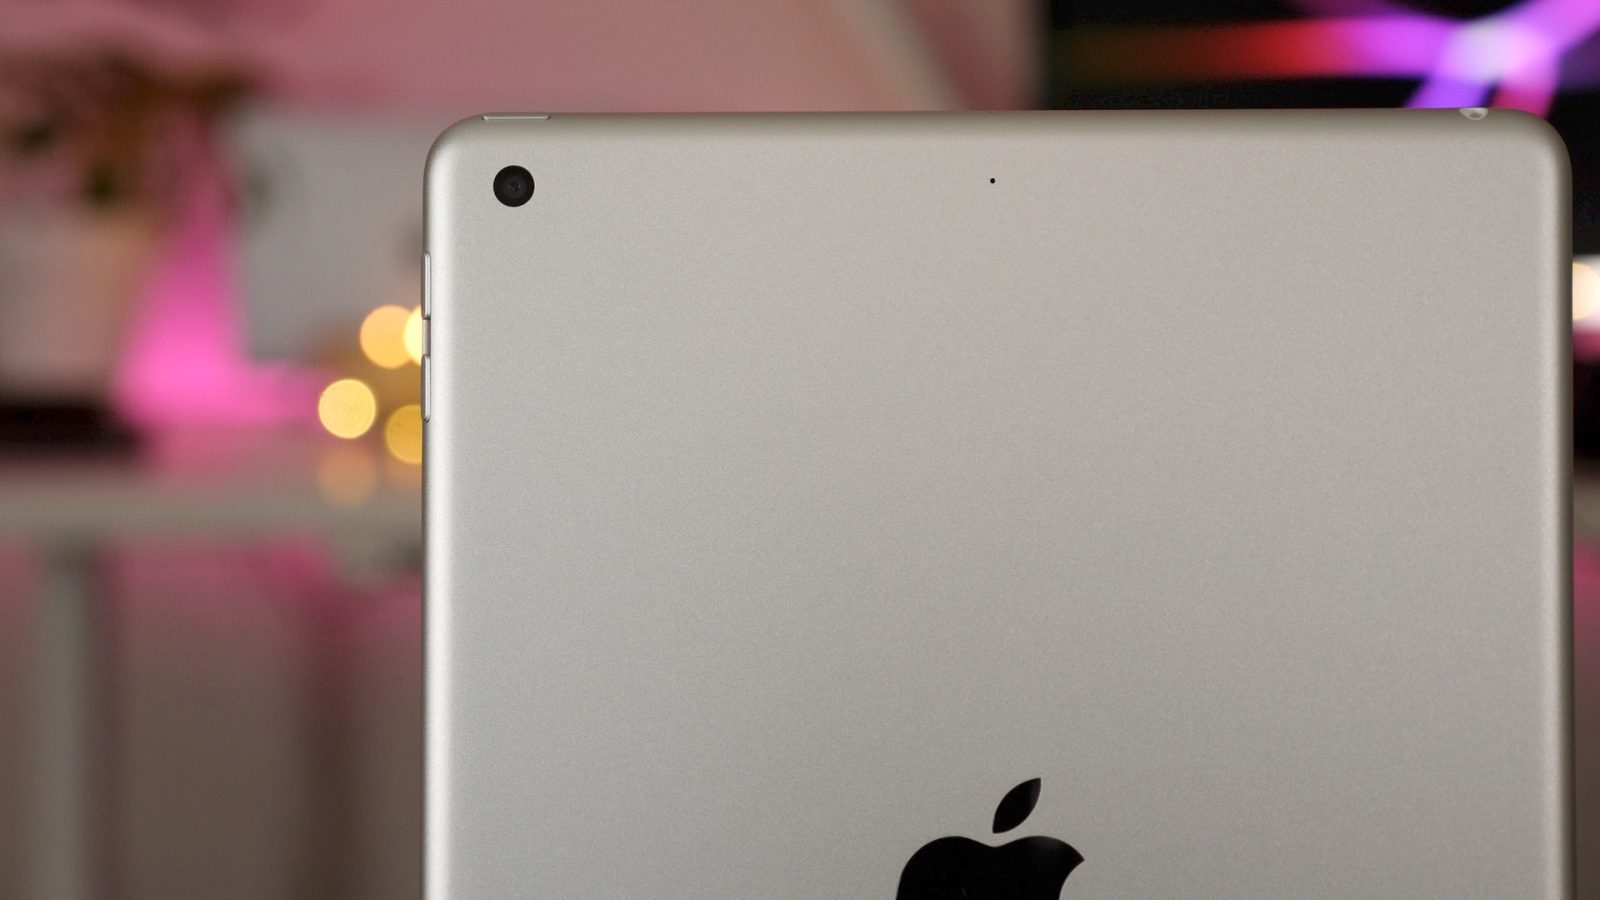 How to trade in your old iPad and upgrade to the 2021 iPad Pro